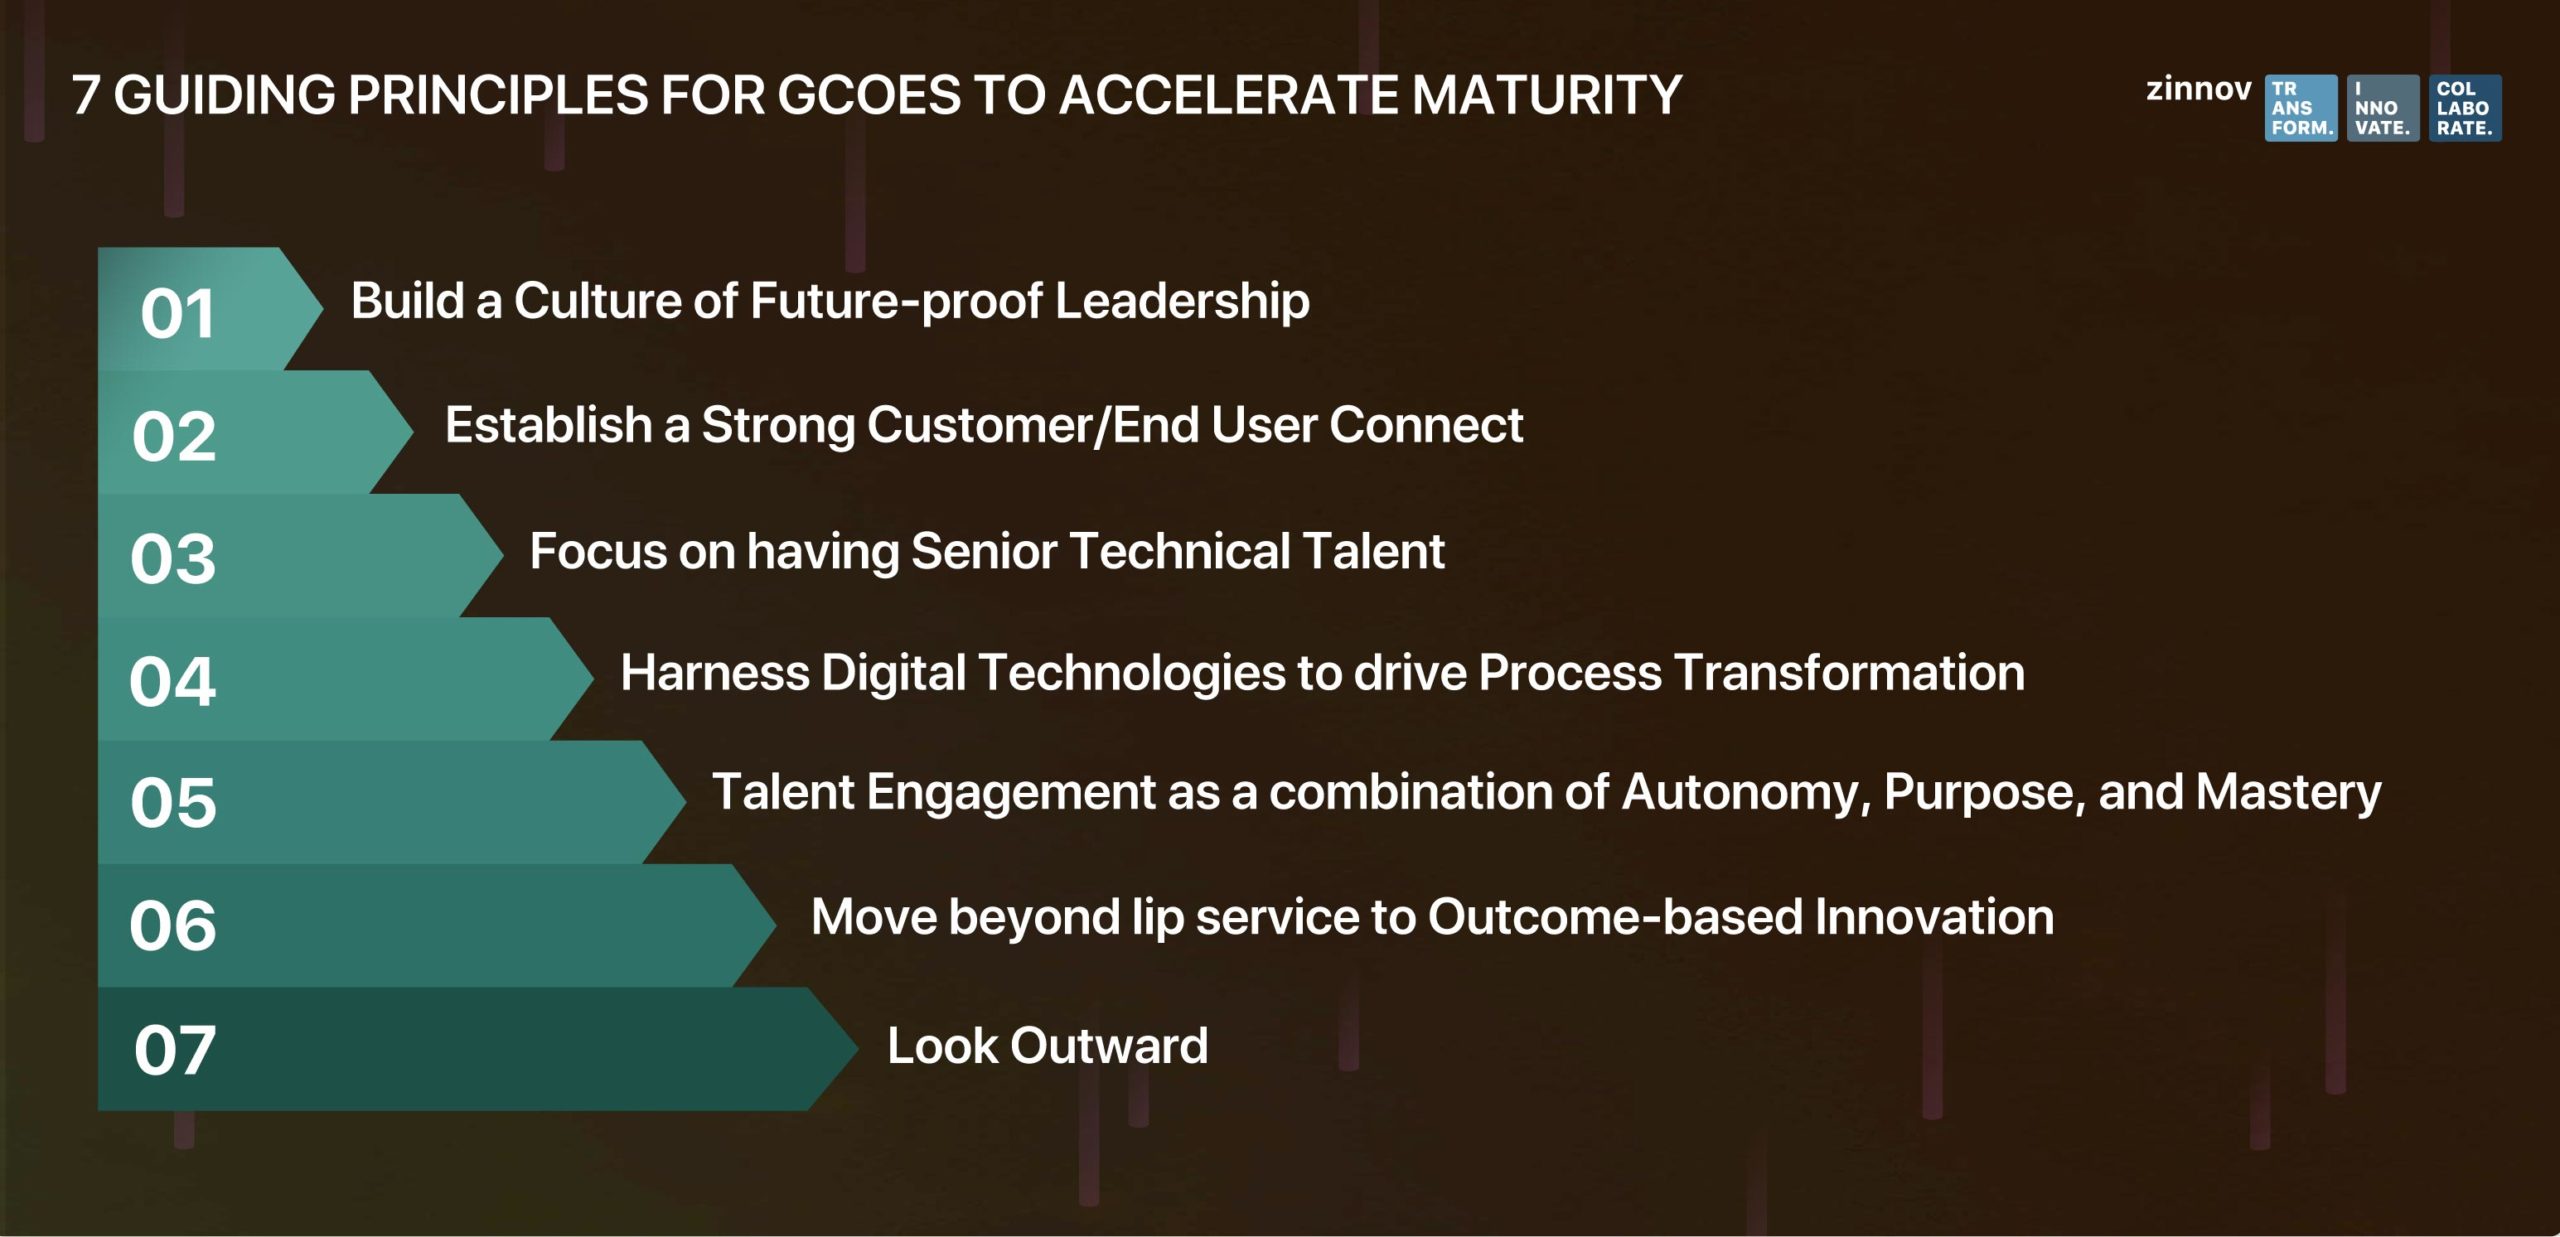 7 Guiding principles for GCoEs to accelerate maturity